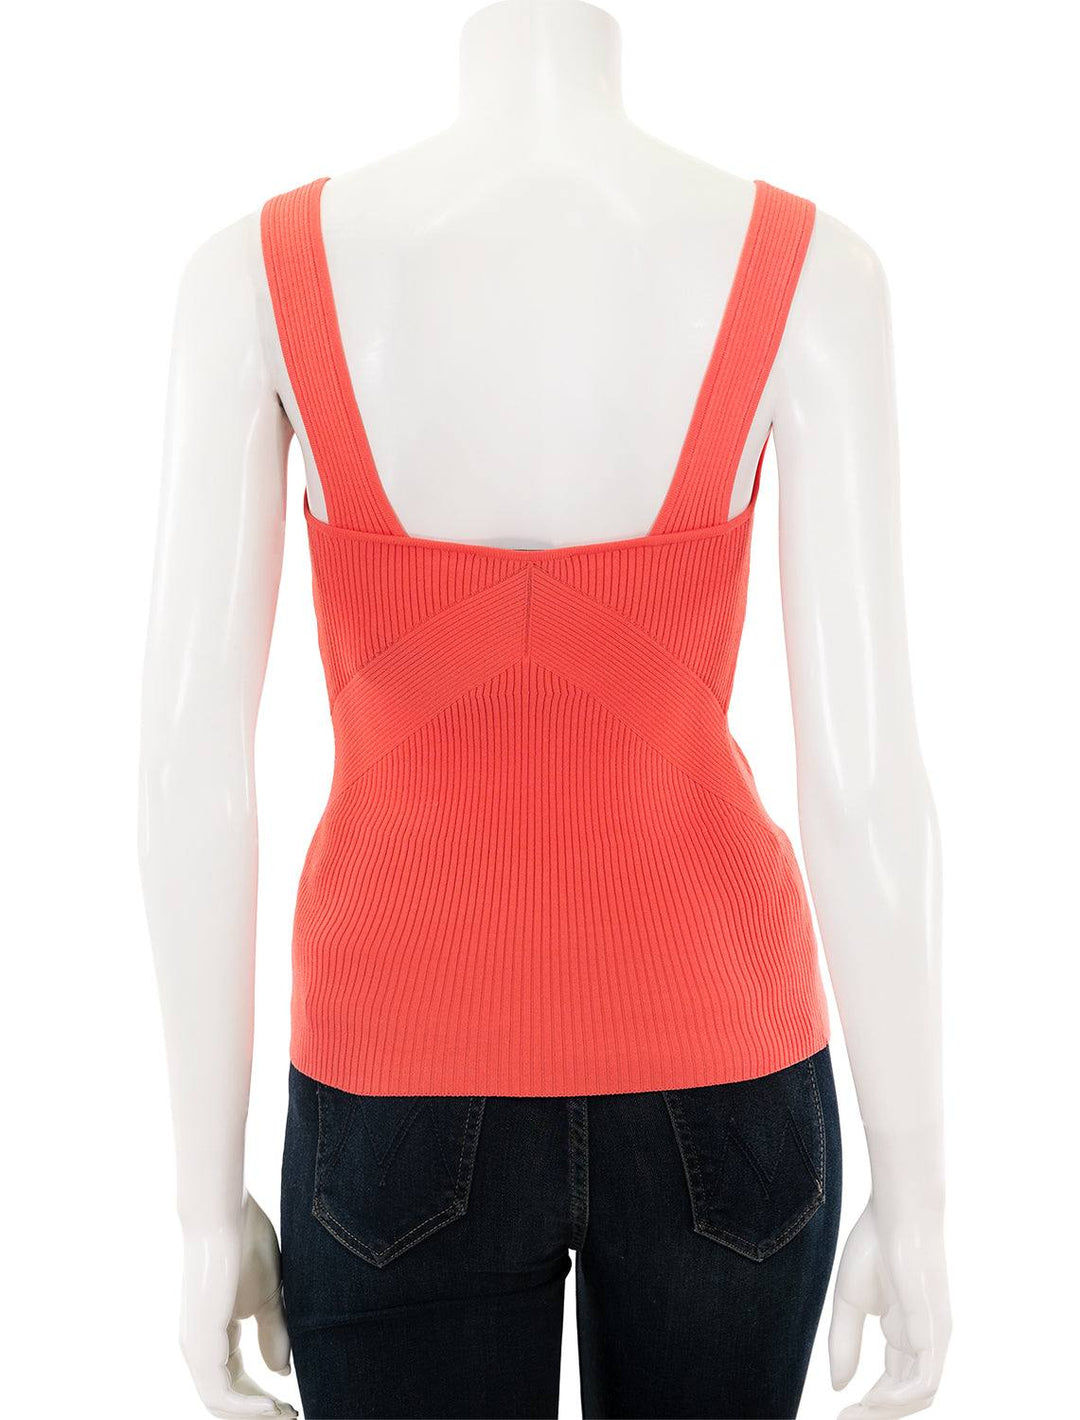 Back view of Rag & Bone's asher tank in coral.